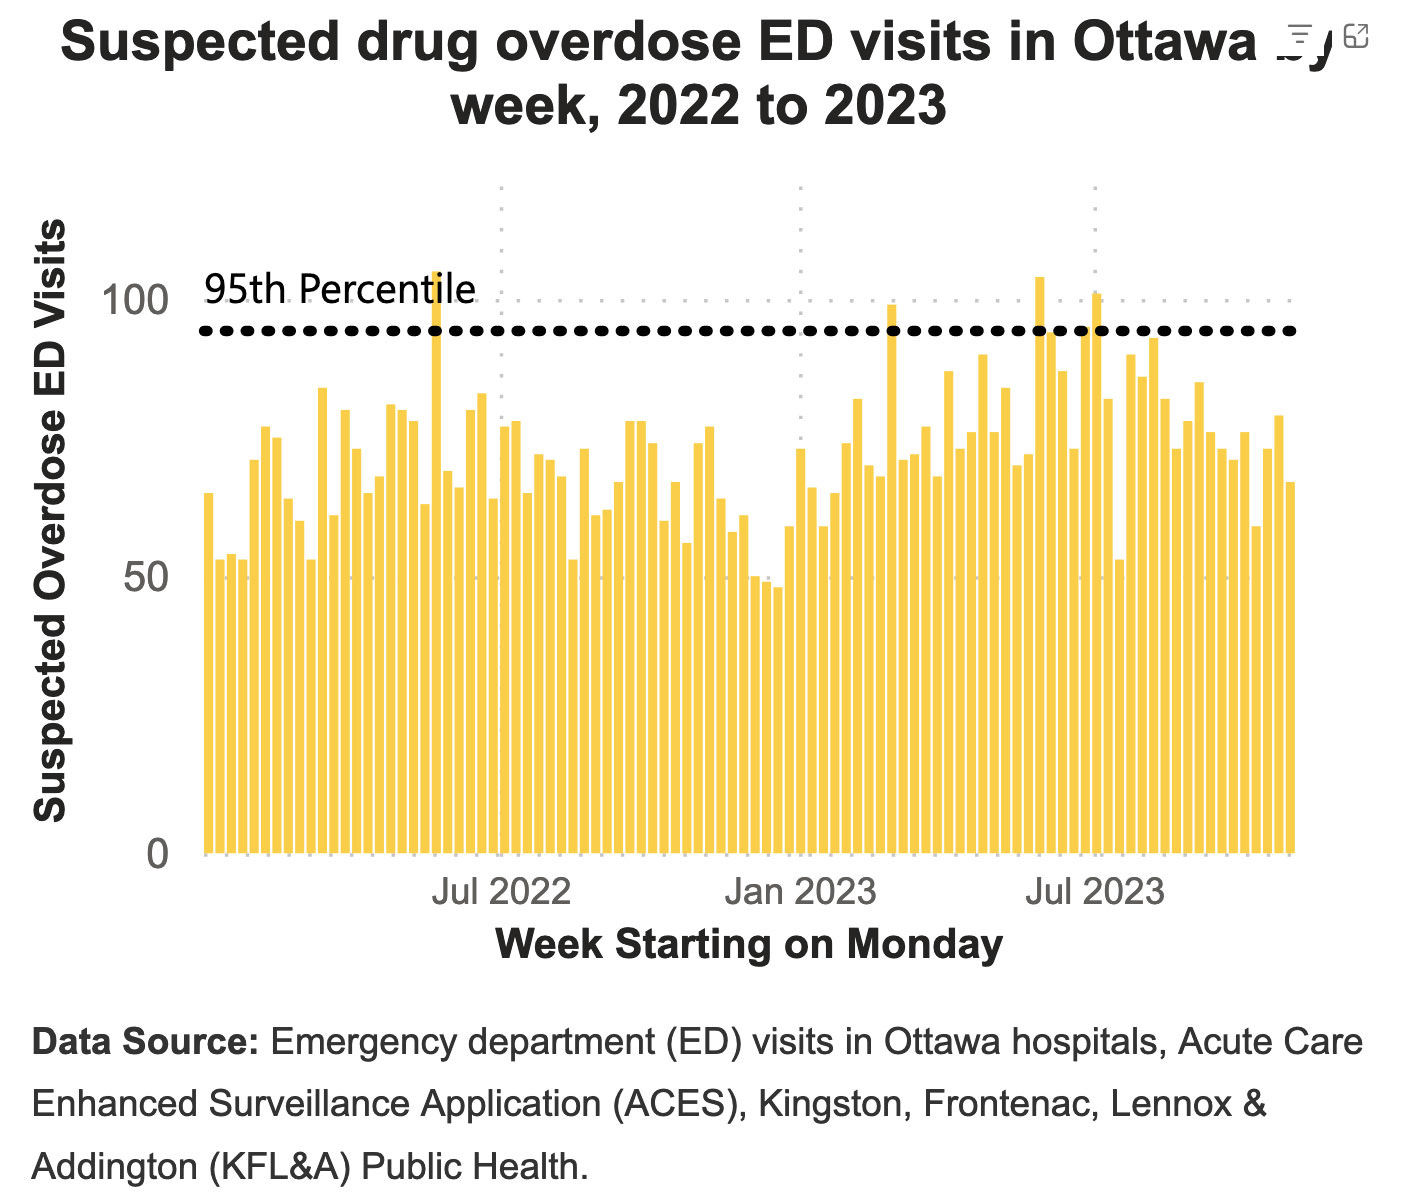 Chart showing suspected drug overdose ED visits by week in Ottawa